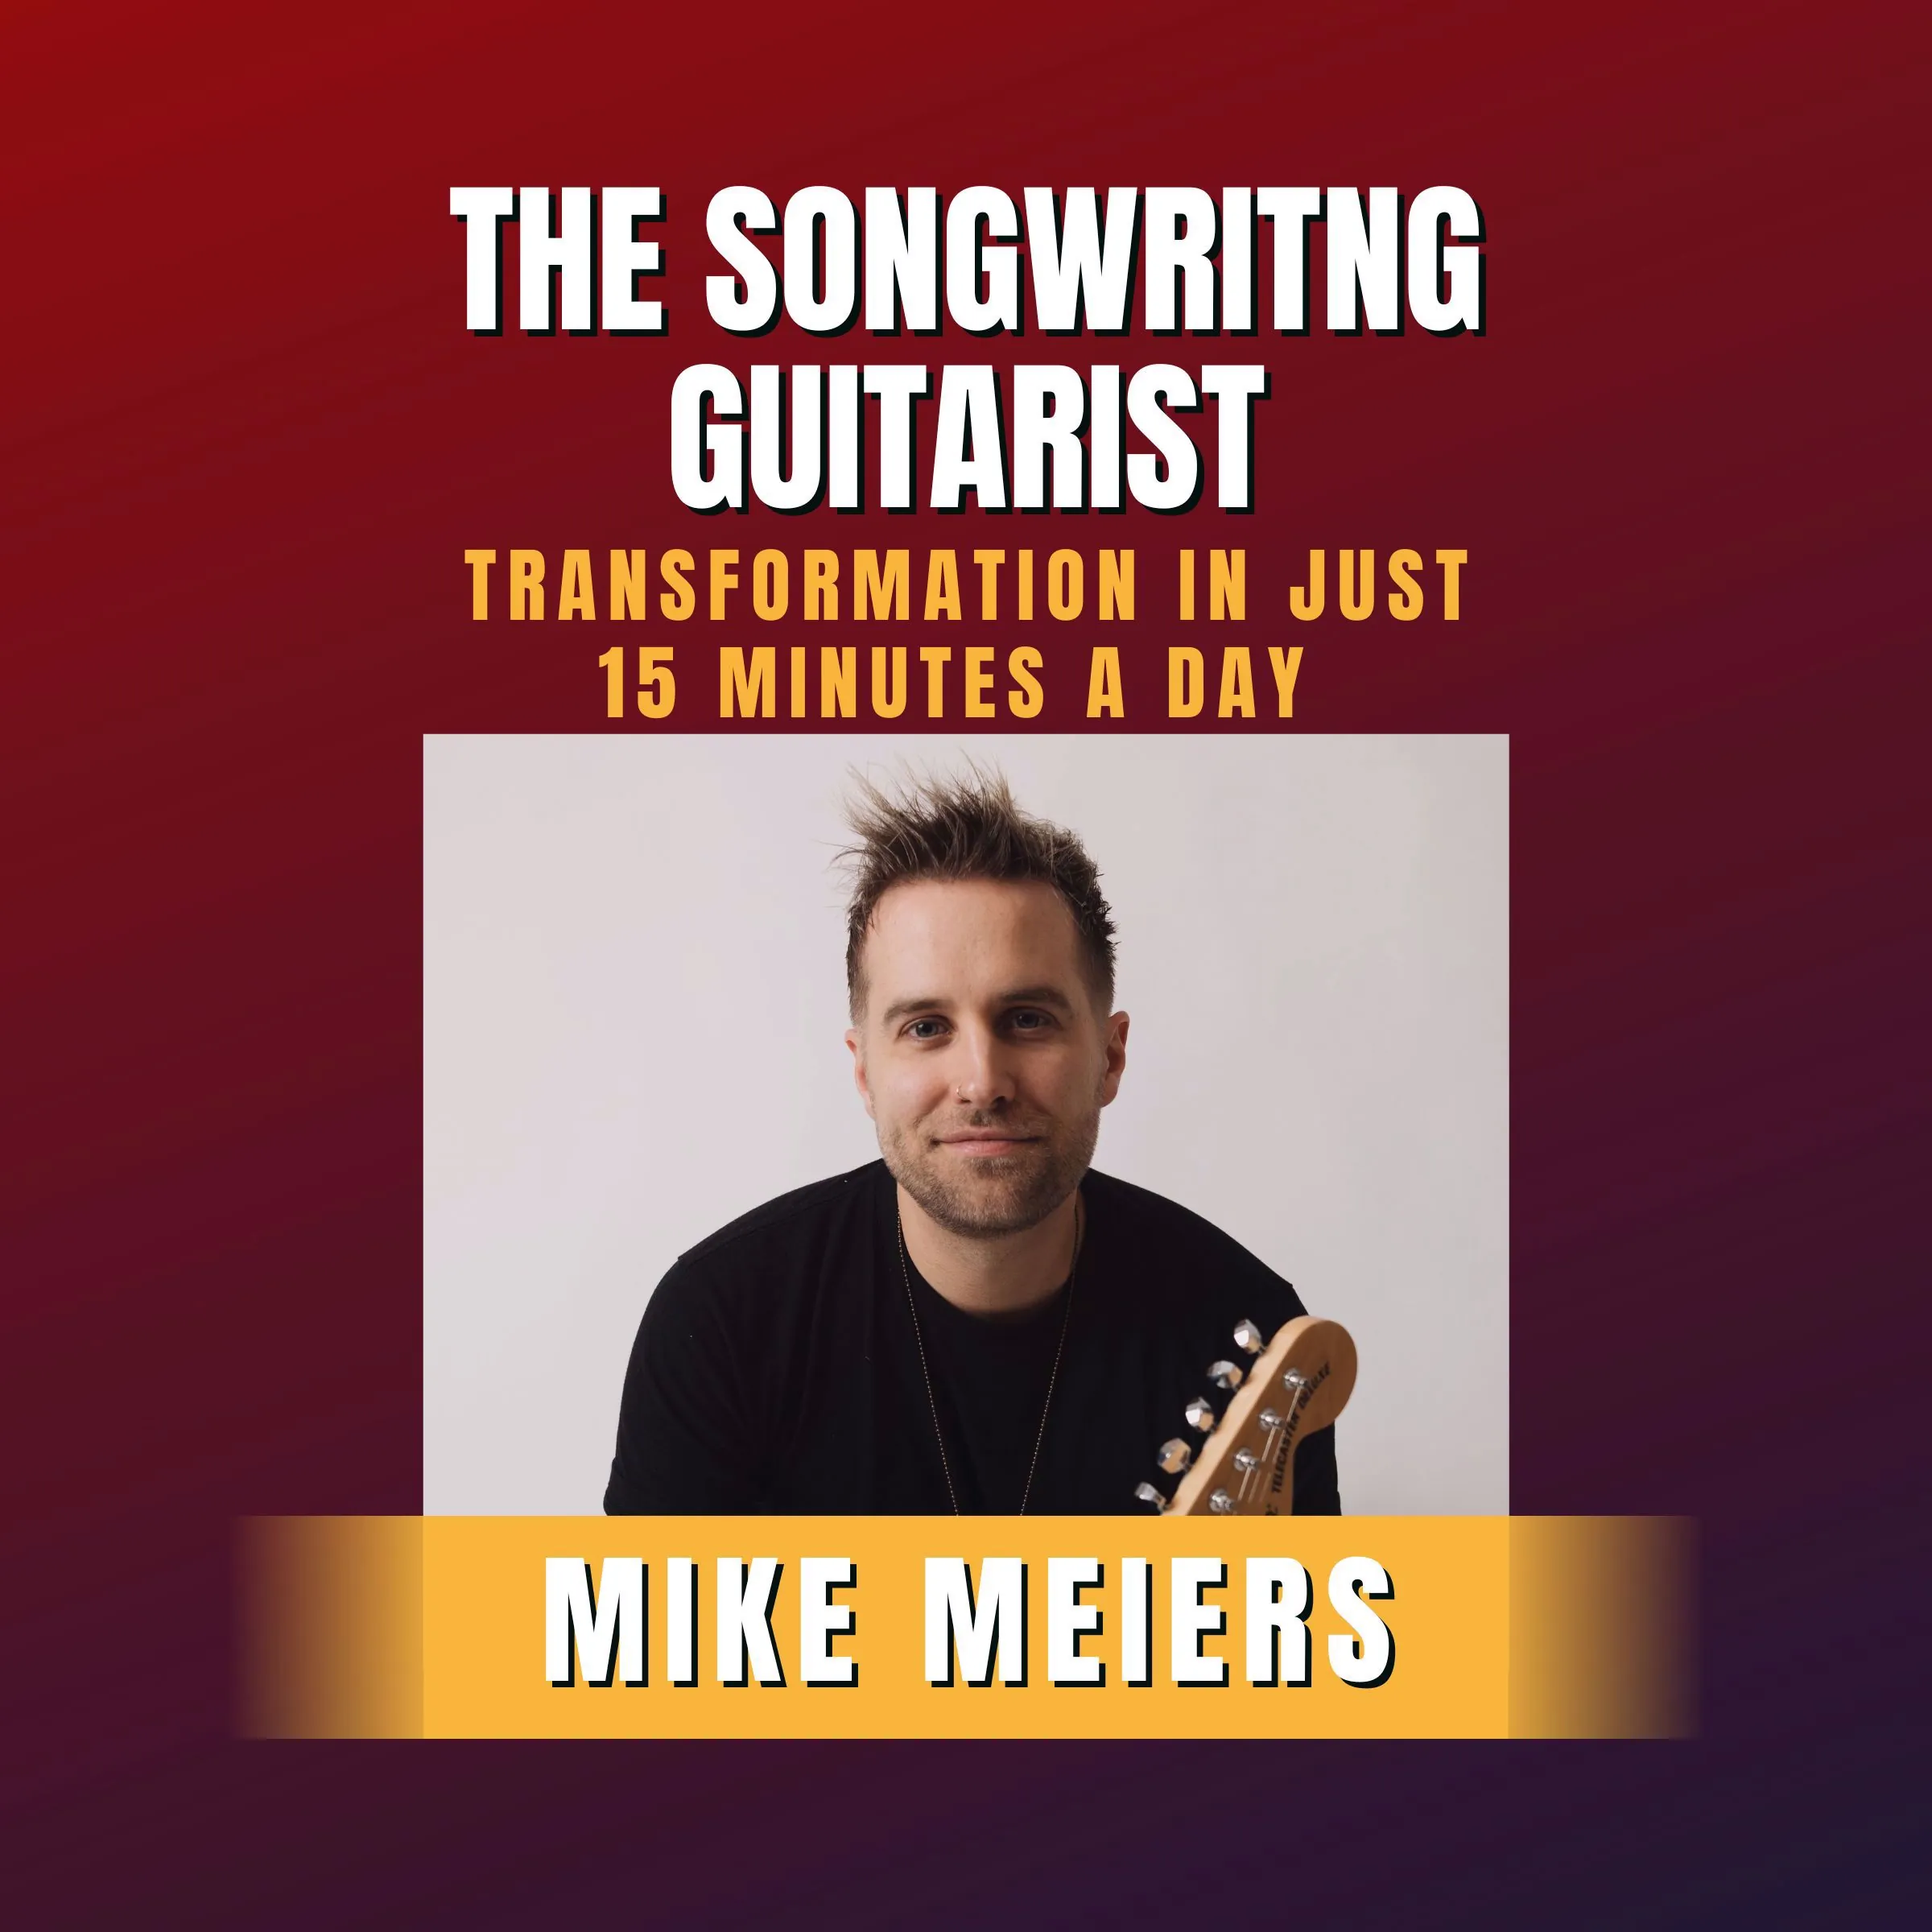 The Songwriting Guitarist Audiobook by Mike Meiers